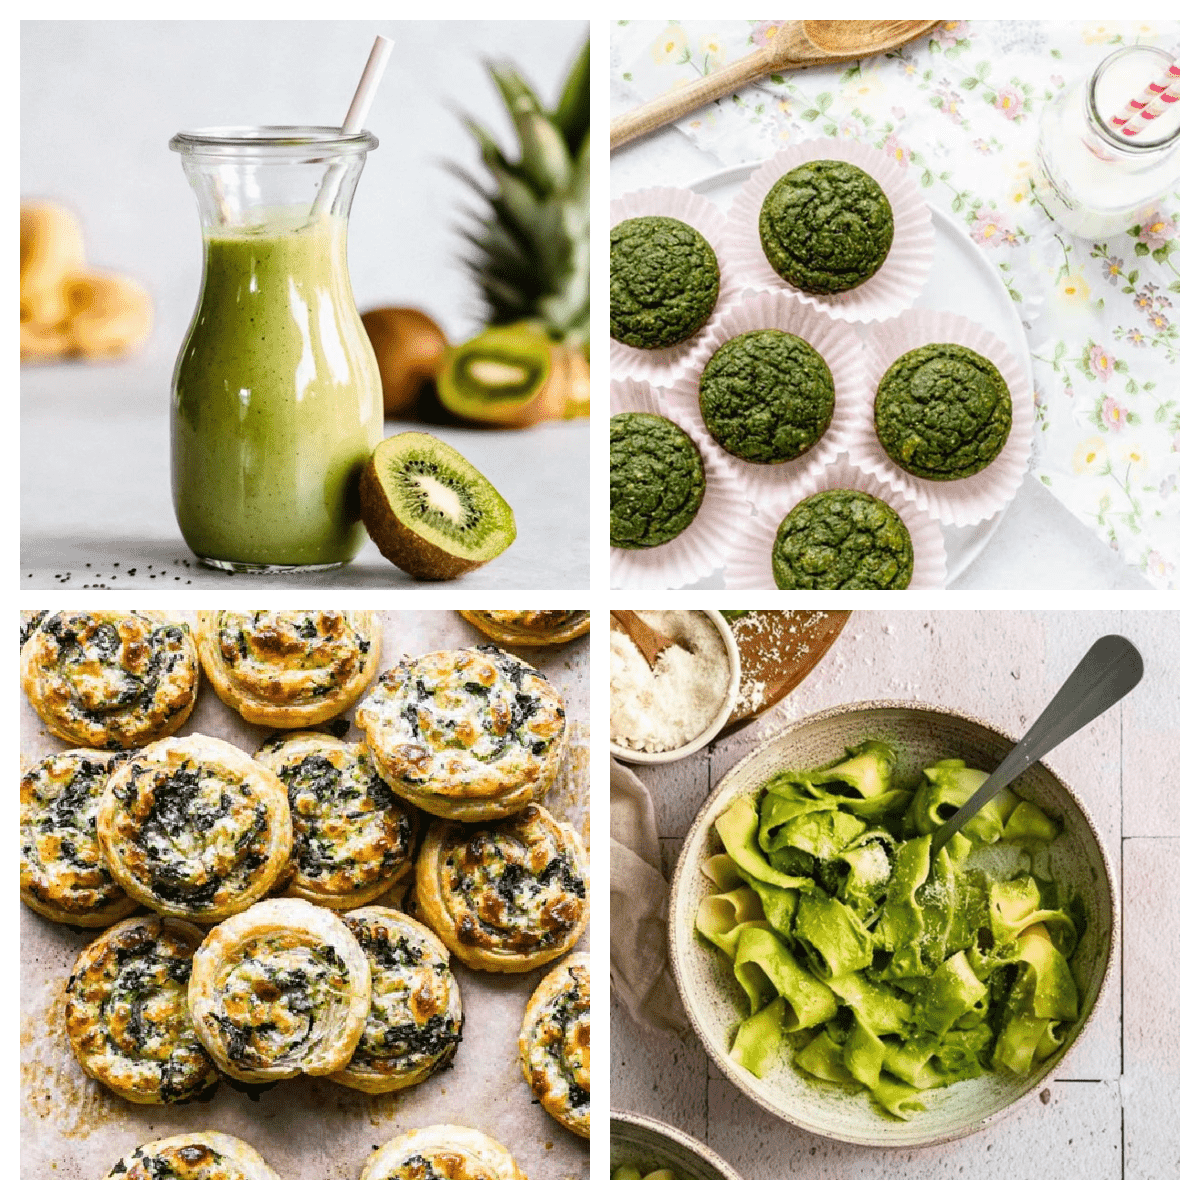 A college of spinach recipes, including pinwheels, pasta, a smoothie and muffins.